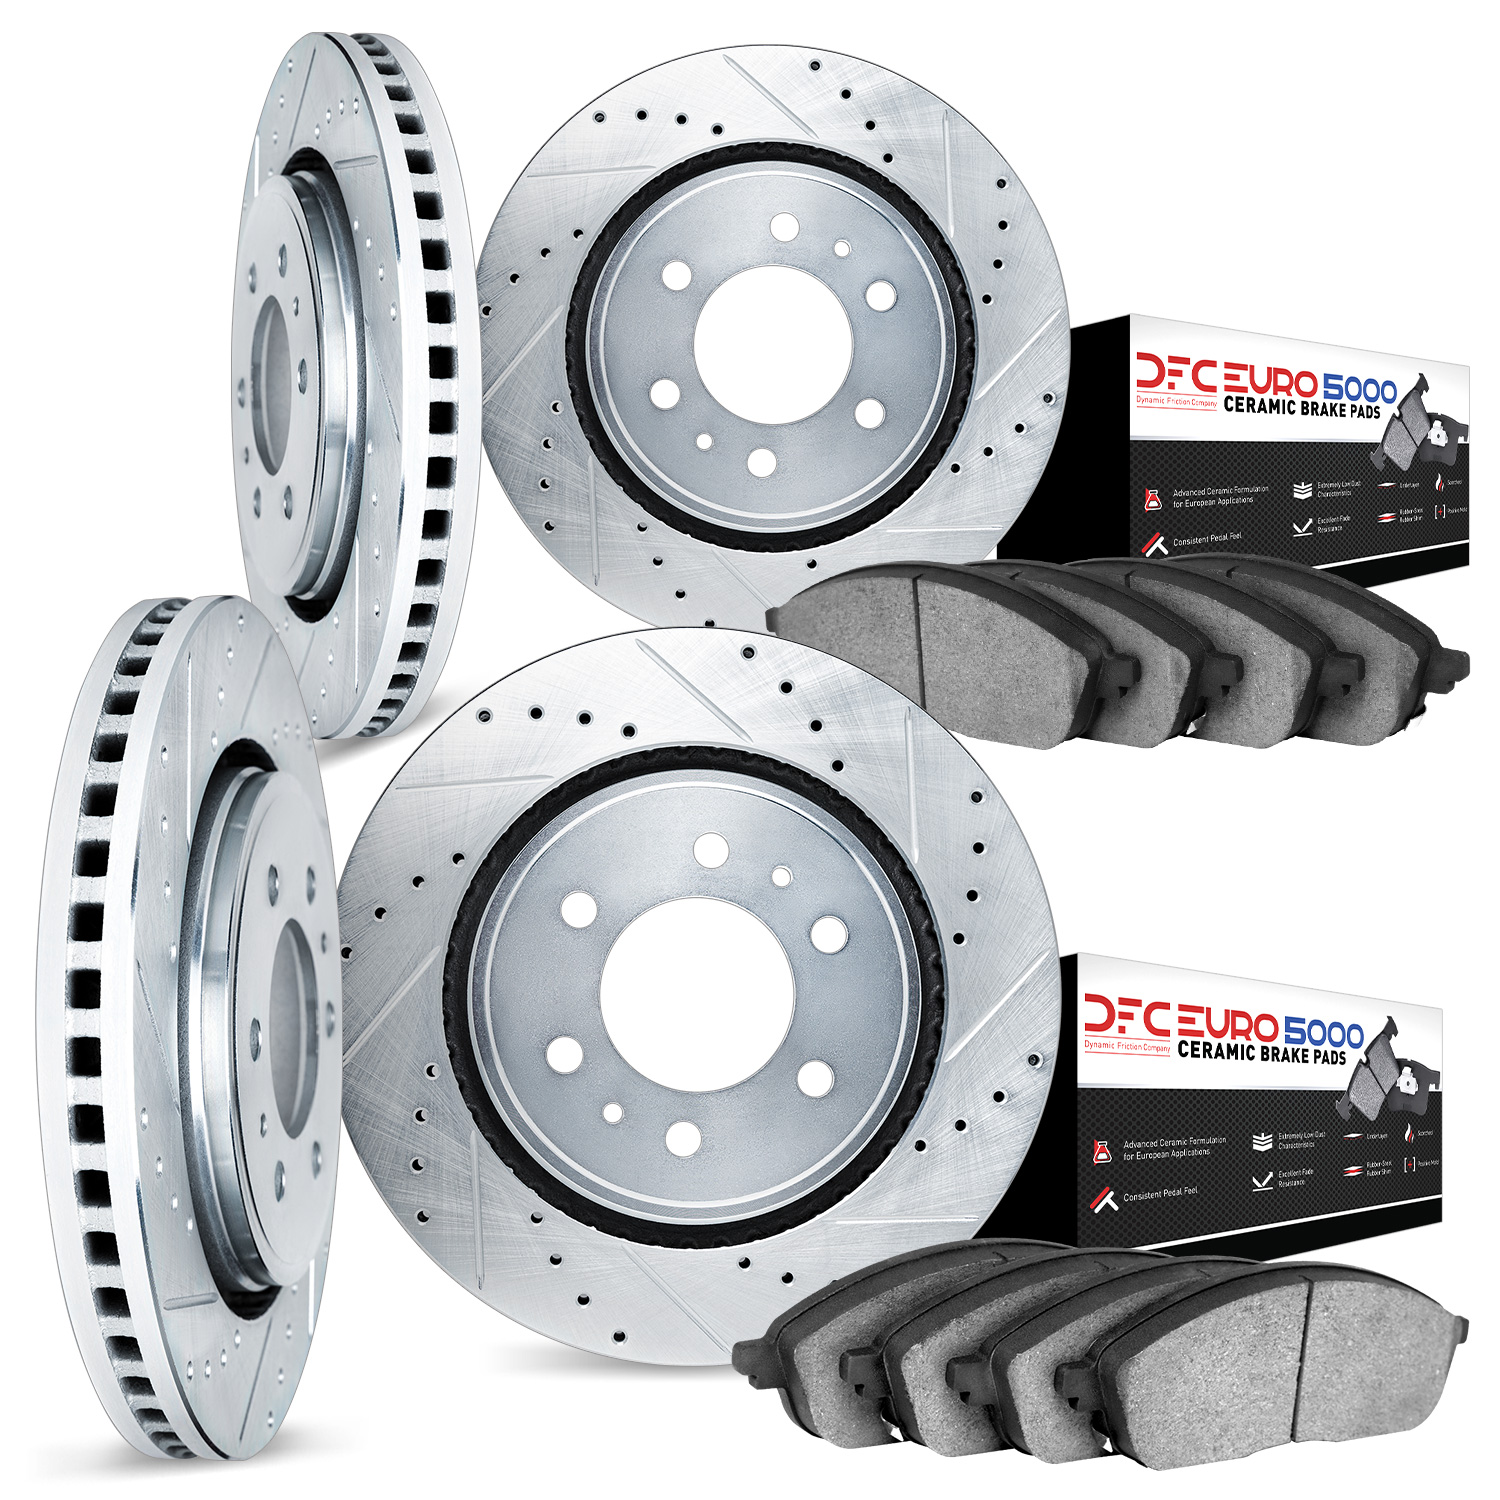 7604-48000 Drilled/Slotted Brake Rotors w/5000 Euro Ceramic Brake Pads Kit [Silver], 2002-2005 GM, Position: Front and Rear